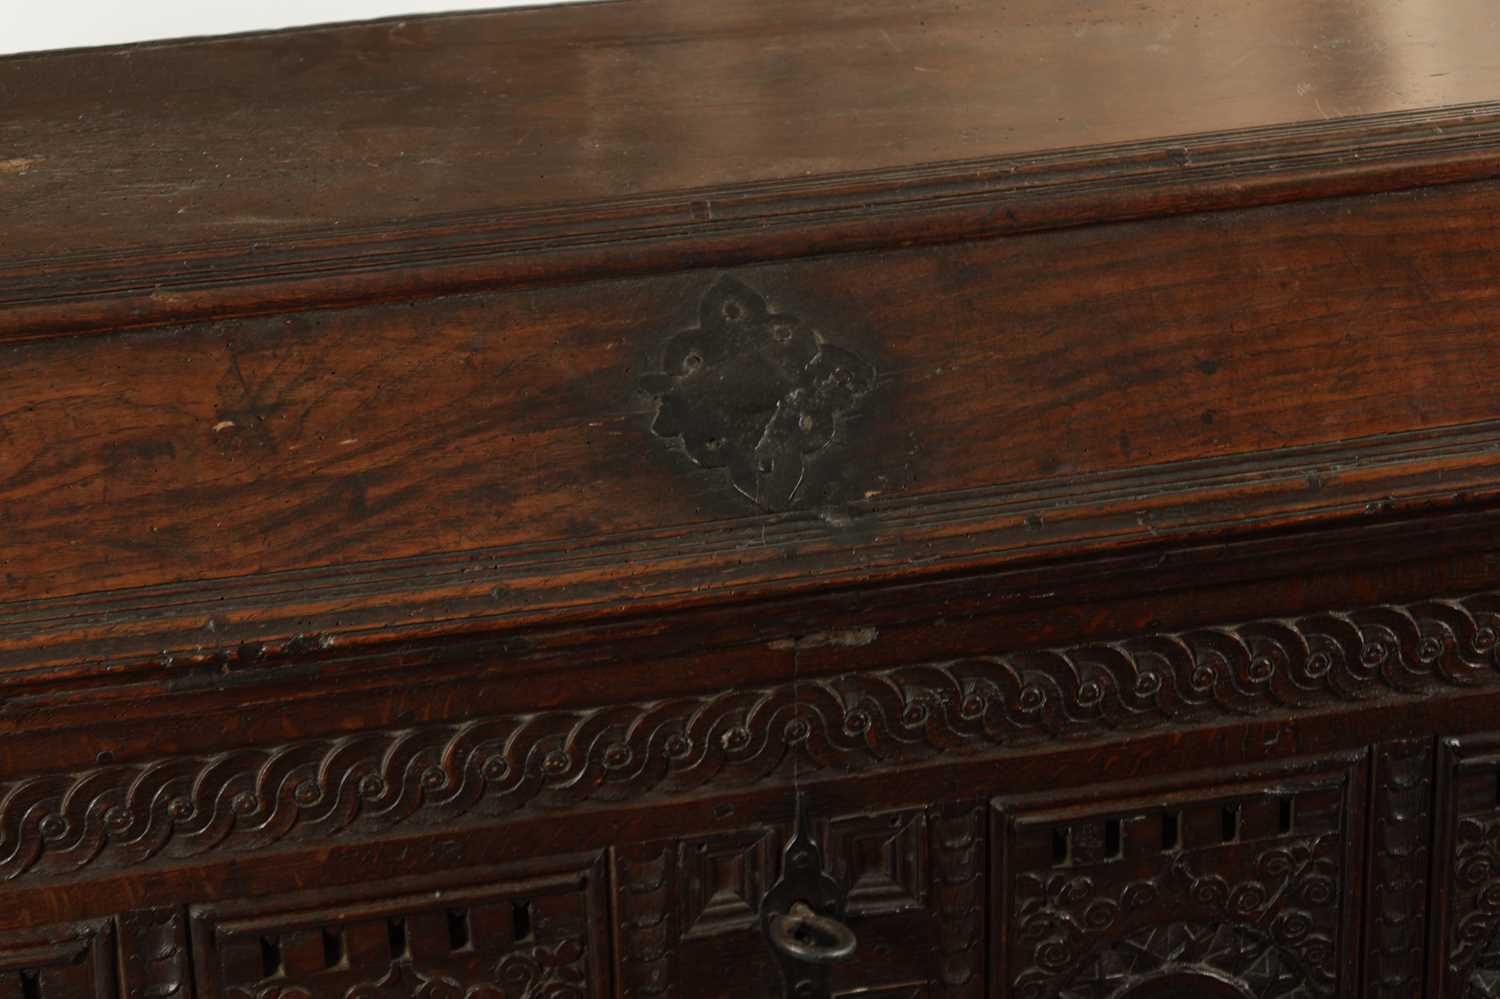 AN EARLY 18TH CENTURY FLEMISH OAK KIST DATED 1718 - Image 3 of 10